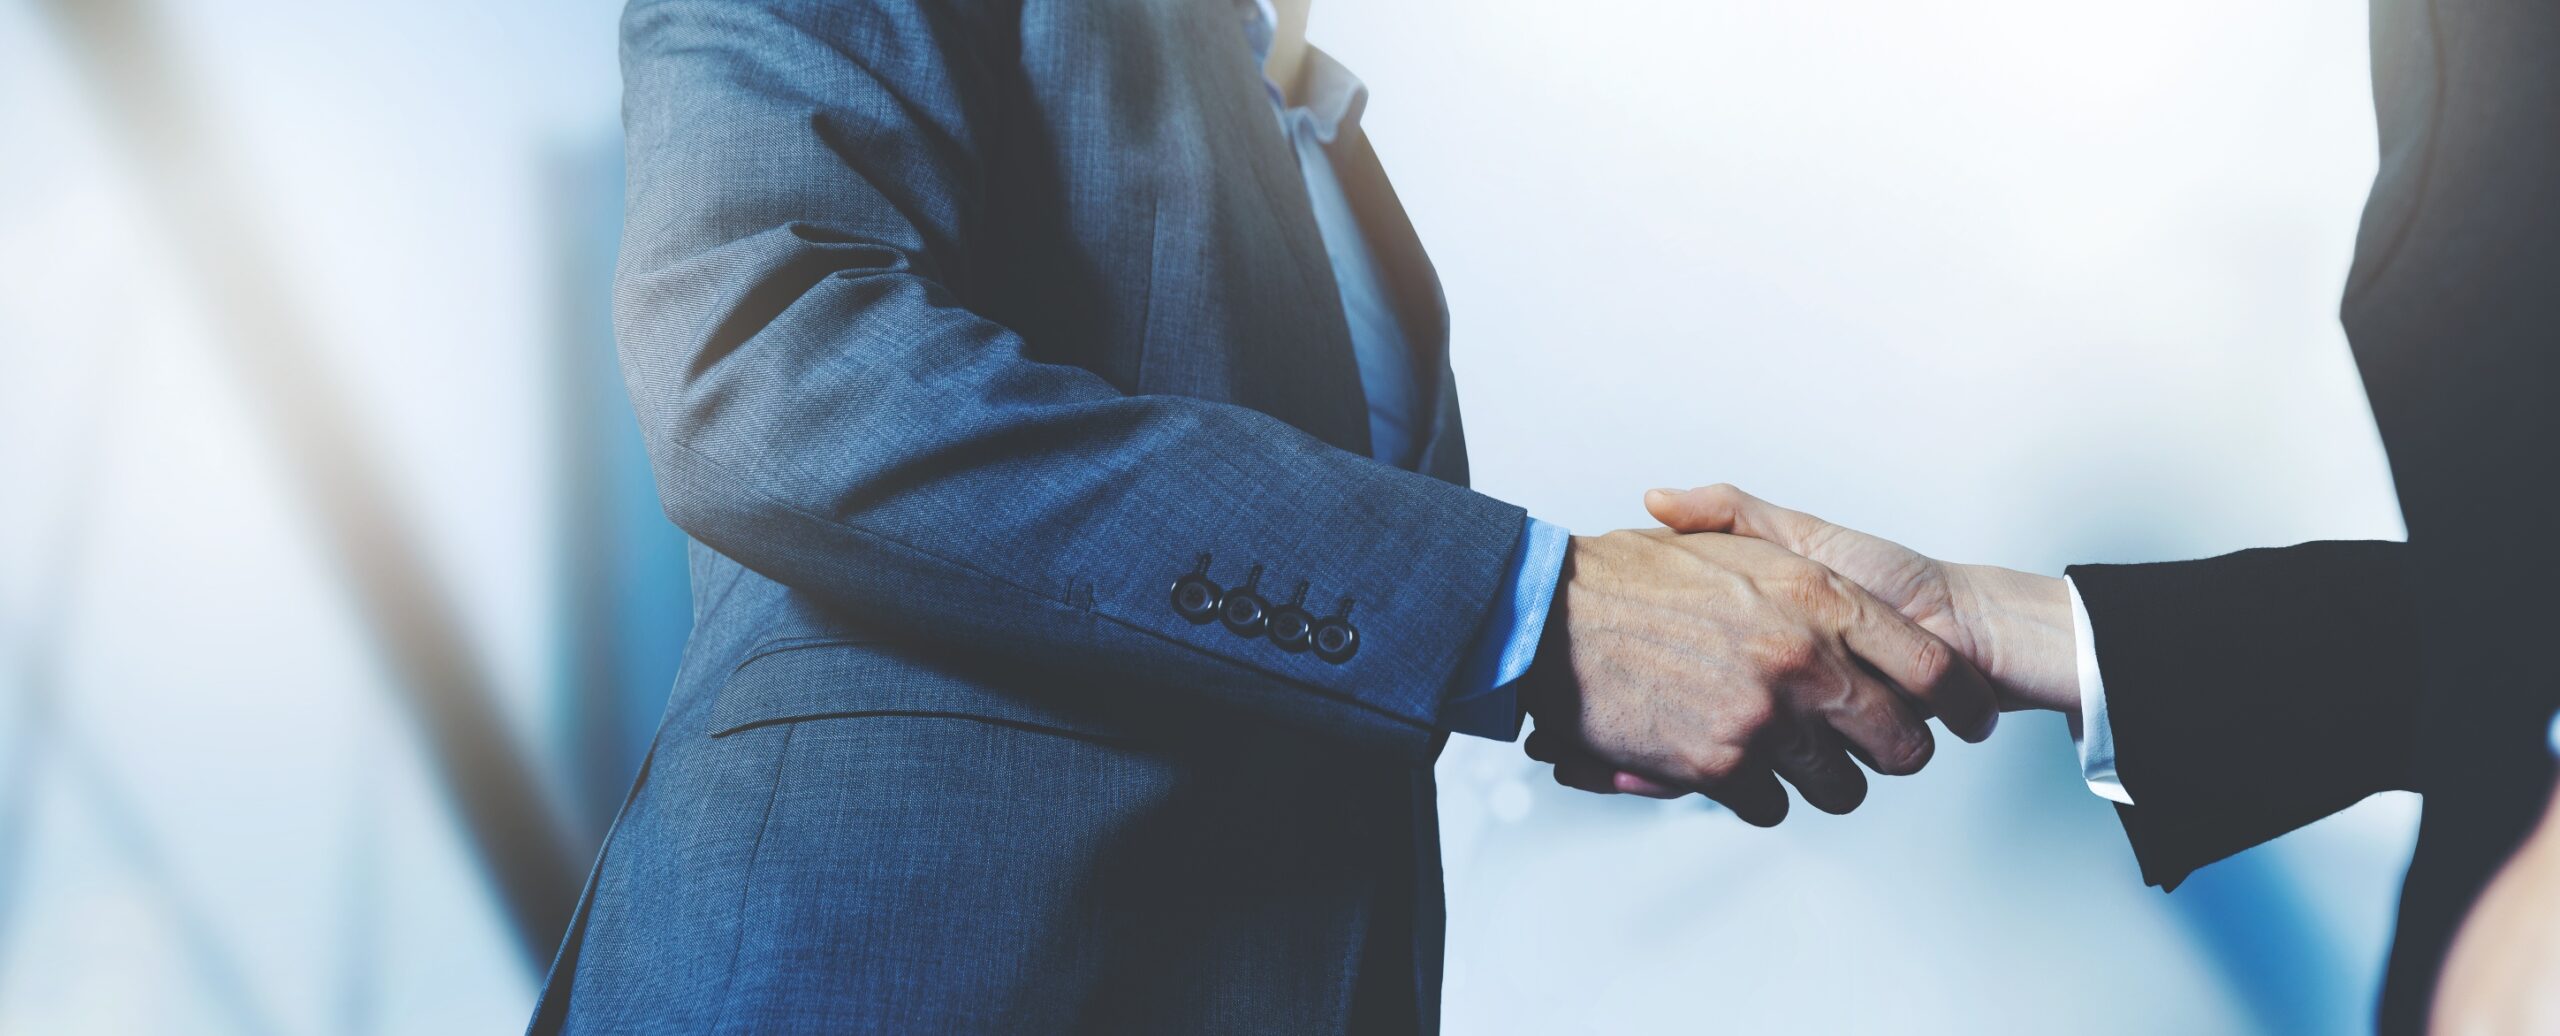 How Impactful are Insurance Carrier Partnerships for Sales?